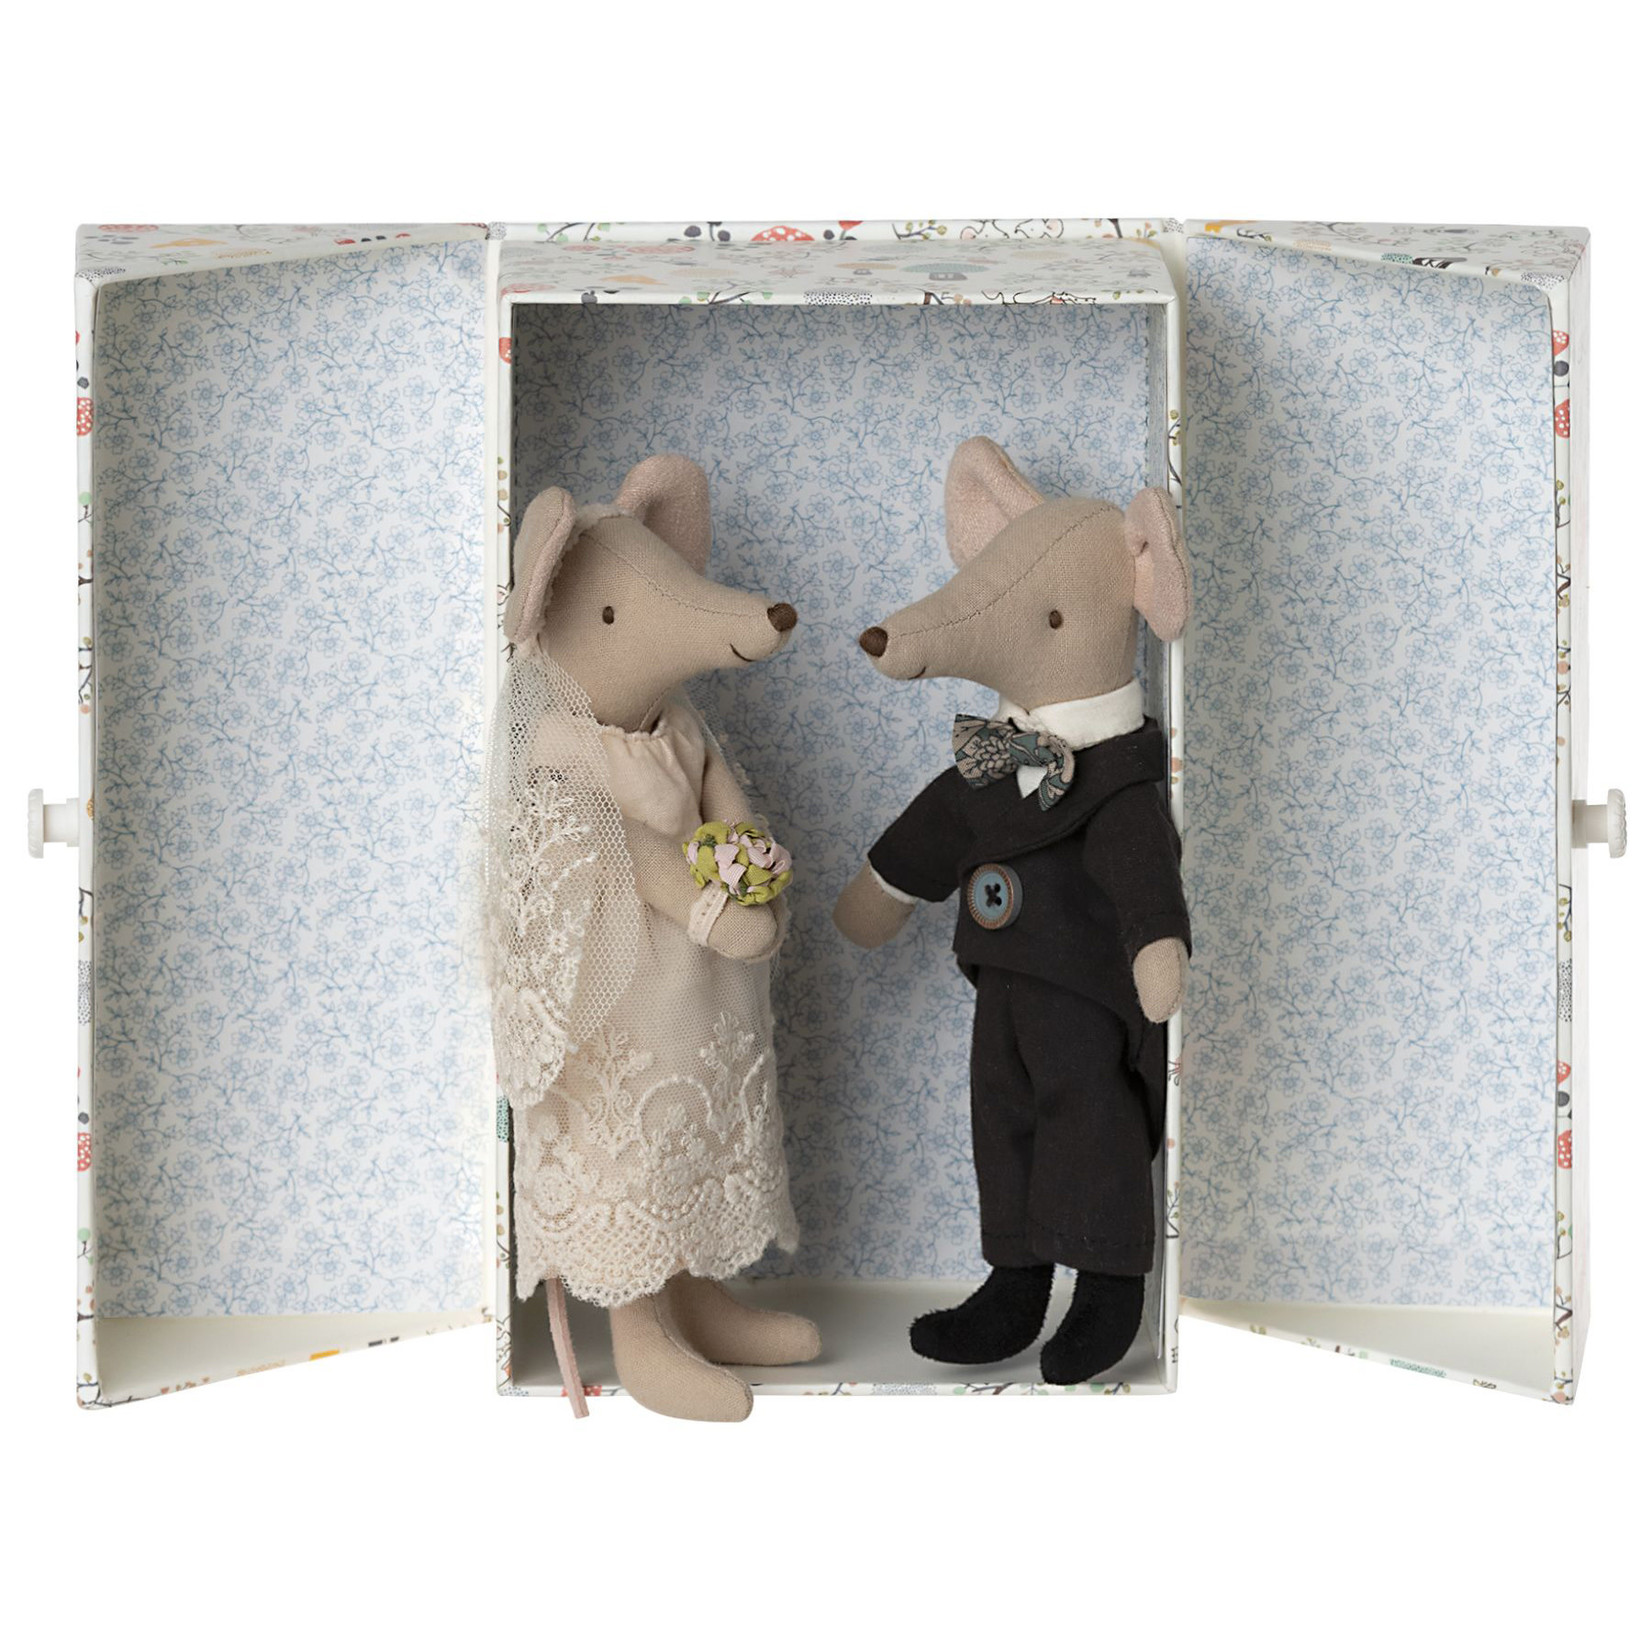 Maileg PRE ORDER Maileg Wedding mice couple in box Bride & Groom - Estimated arrival mid/end May